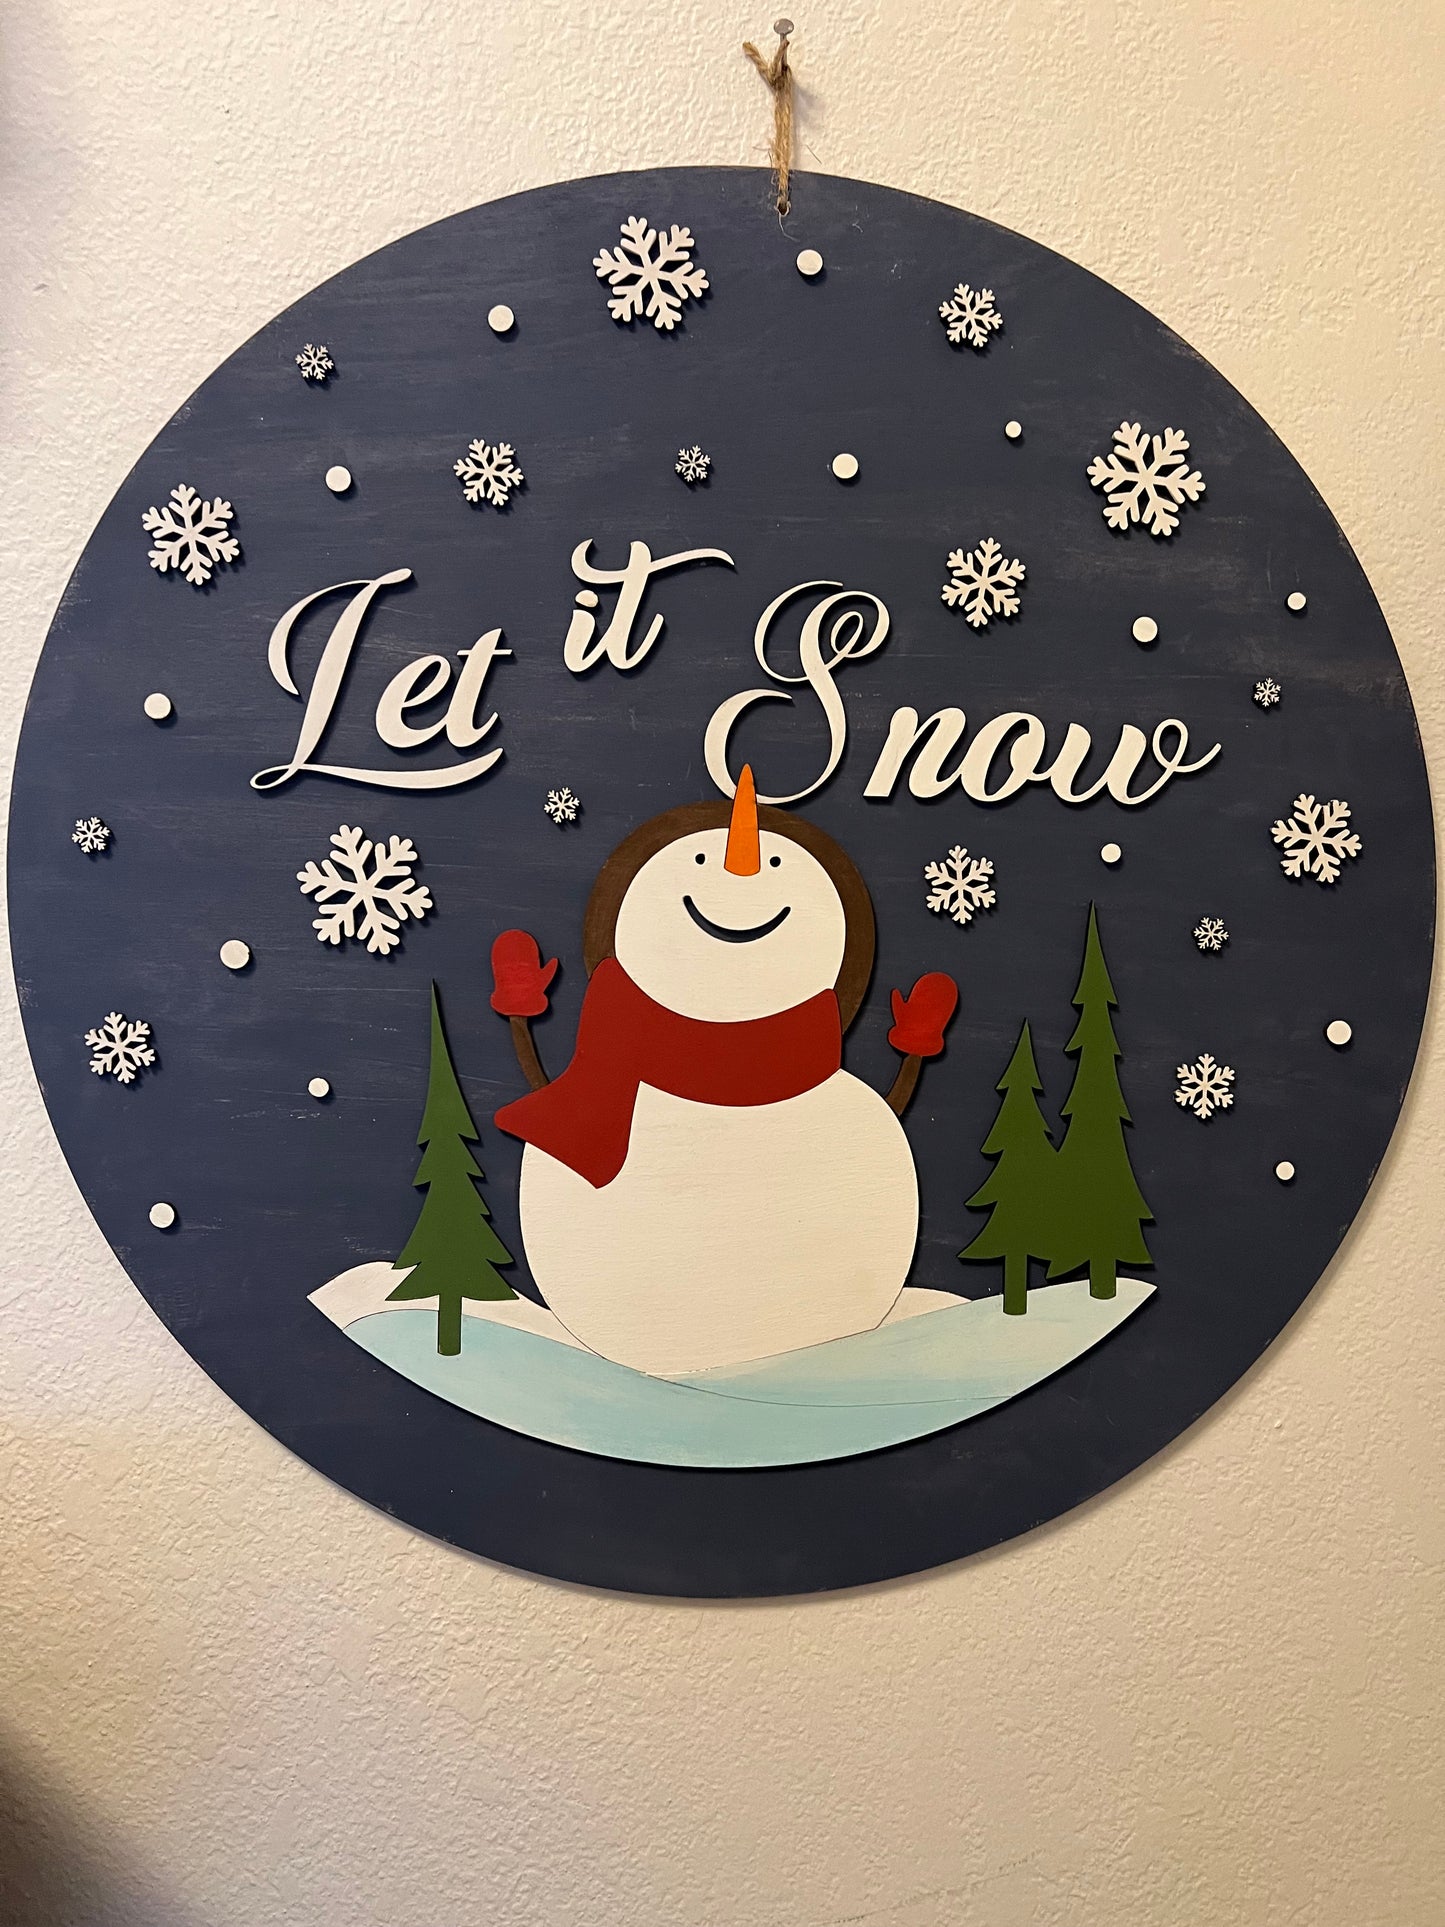 3D Let It Snow with Snowman and Snowflakes Door Hanger